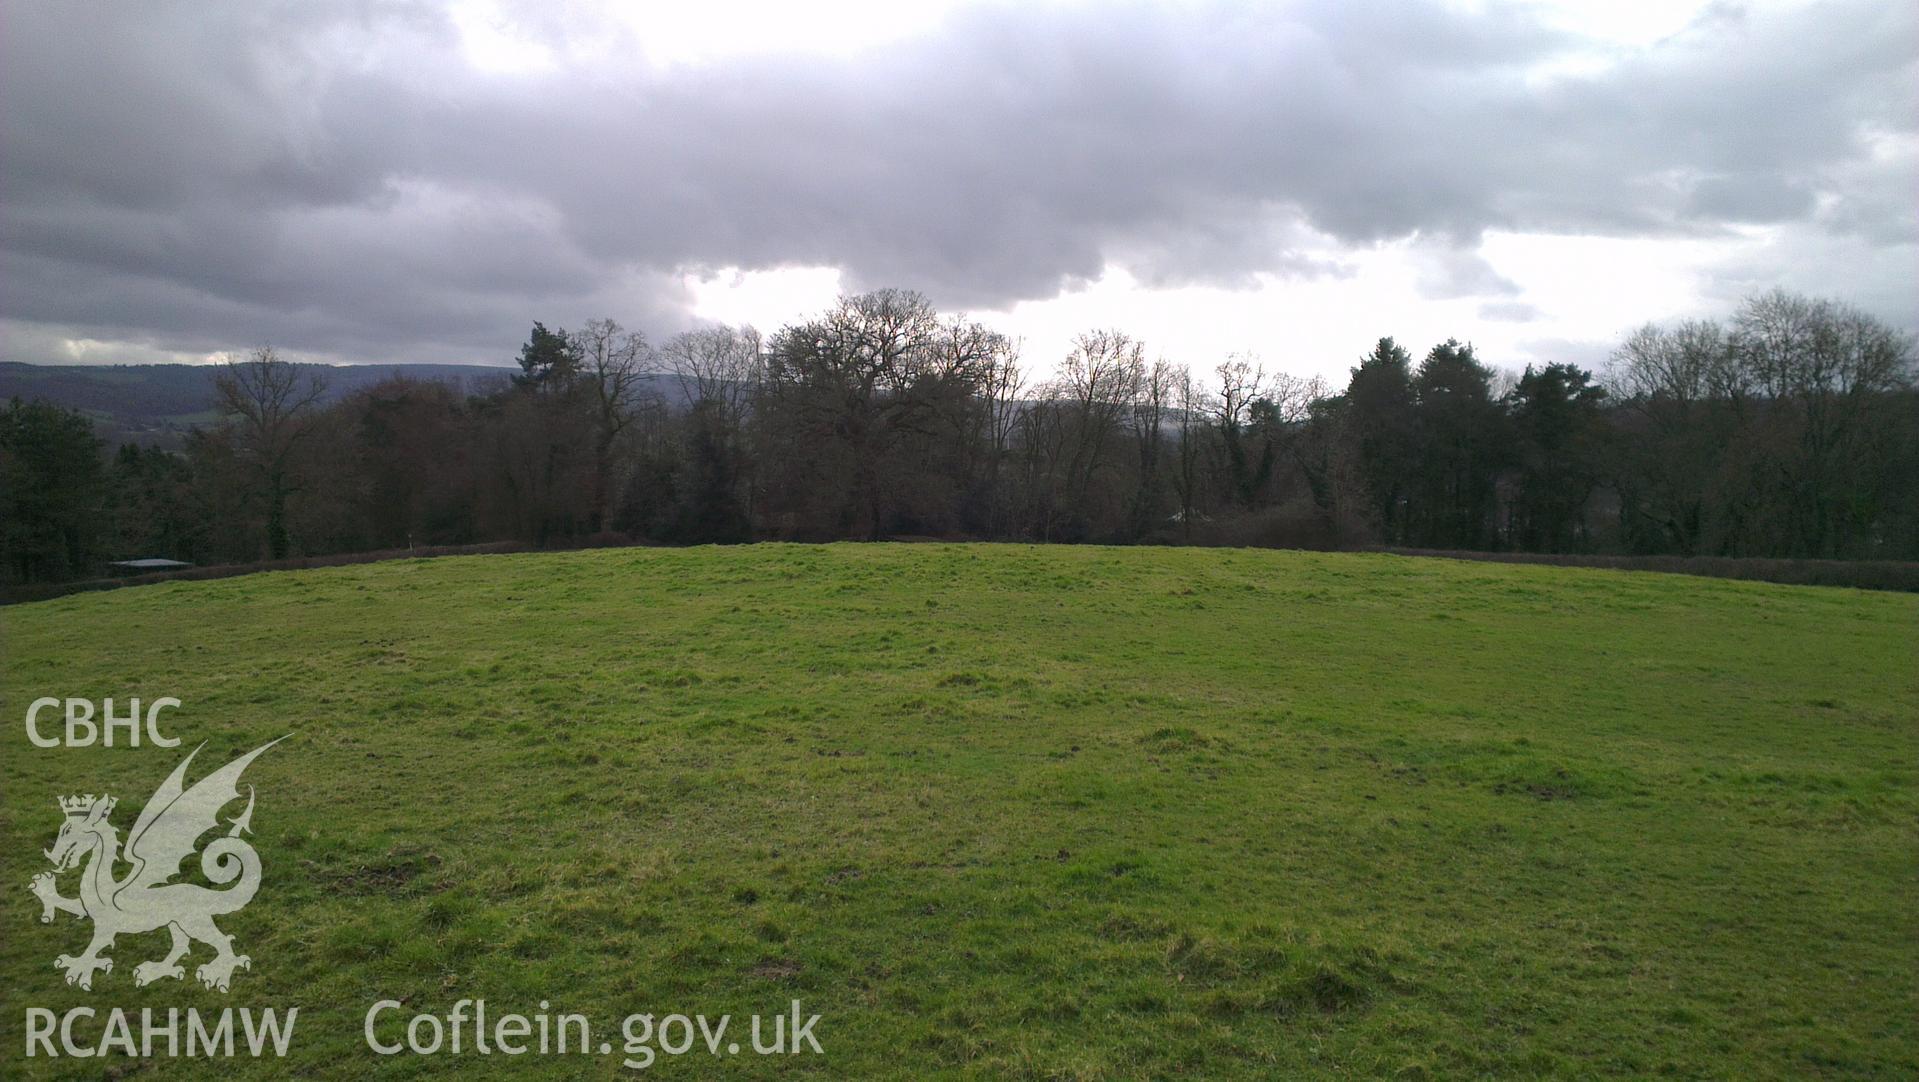 Digital colour photograph of the Pwllmelyn battlefield. Photographed during Phase Three of the Welsh Battlefield Metal Detector Survey, carried out by Archaeology Wales, 2012-2014. Project code: 2041 - WBS/12/SUR.